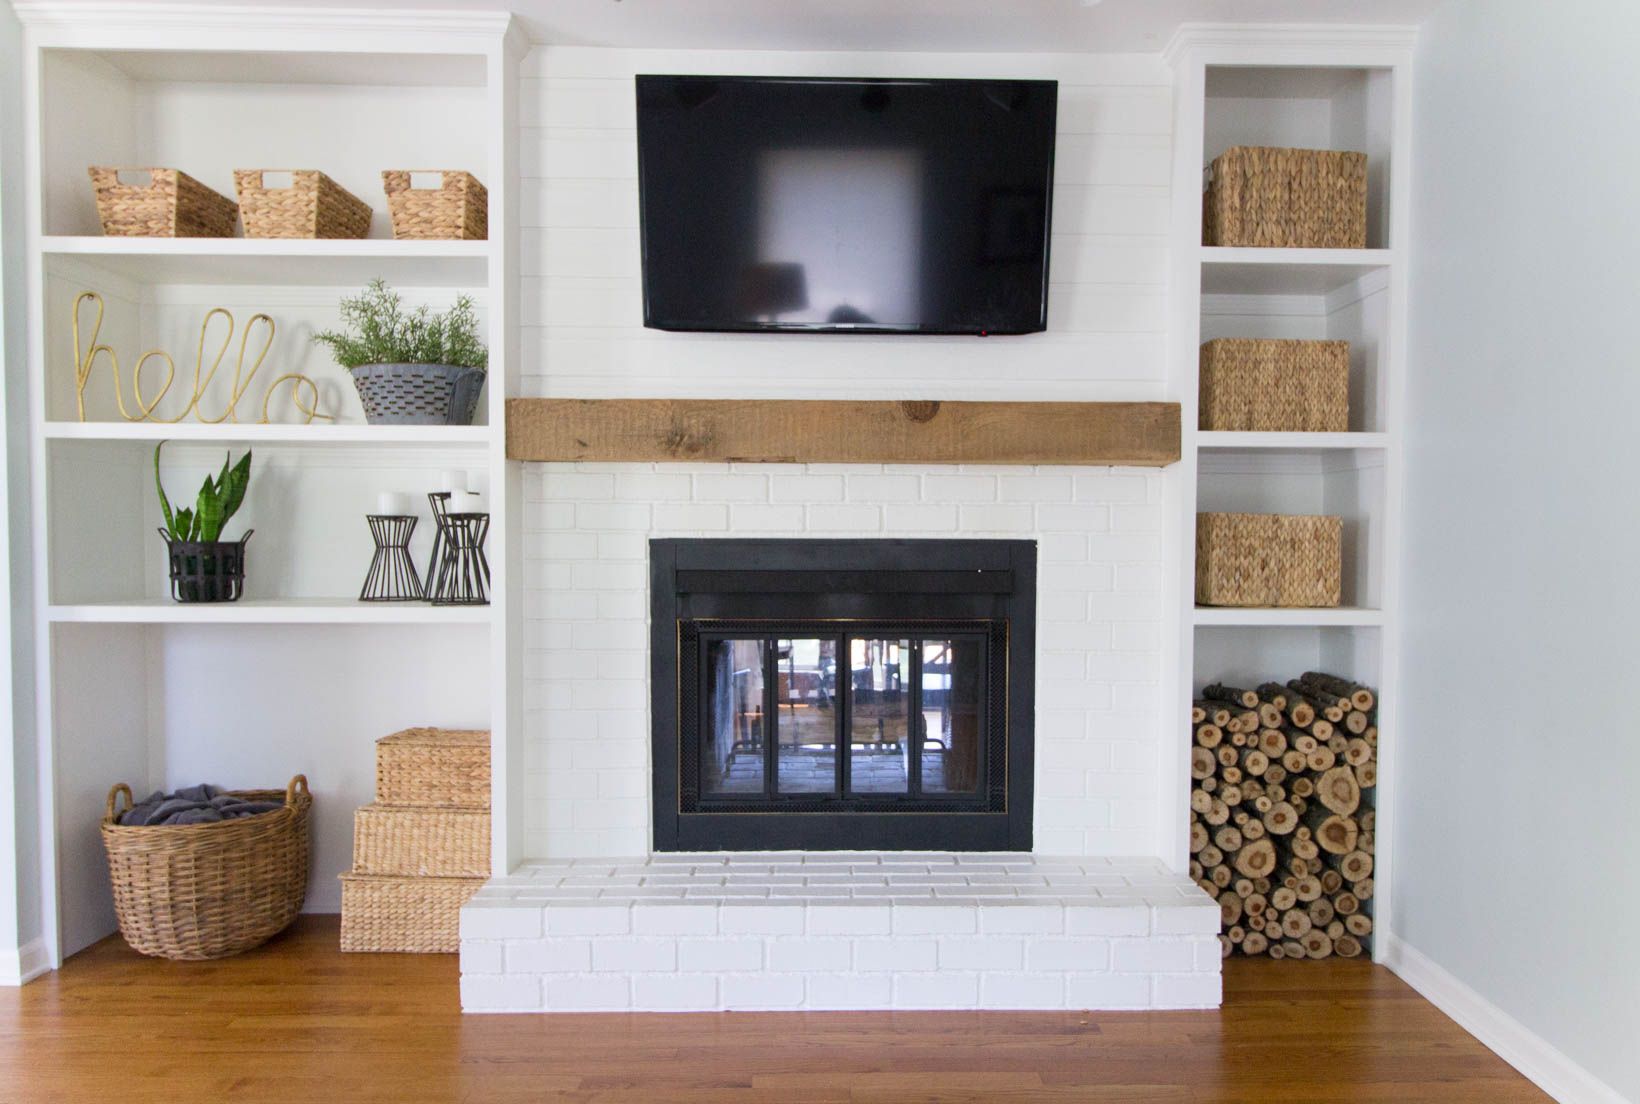 Floating Shelves by Fireplace Lovely Built In Shelves Around Shallow Depth Brick Fireplace